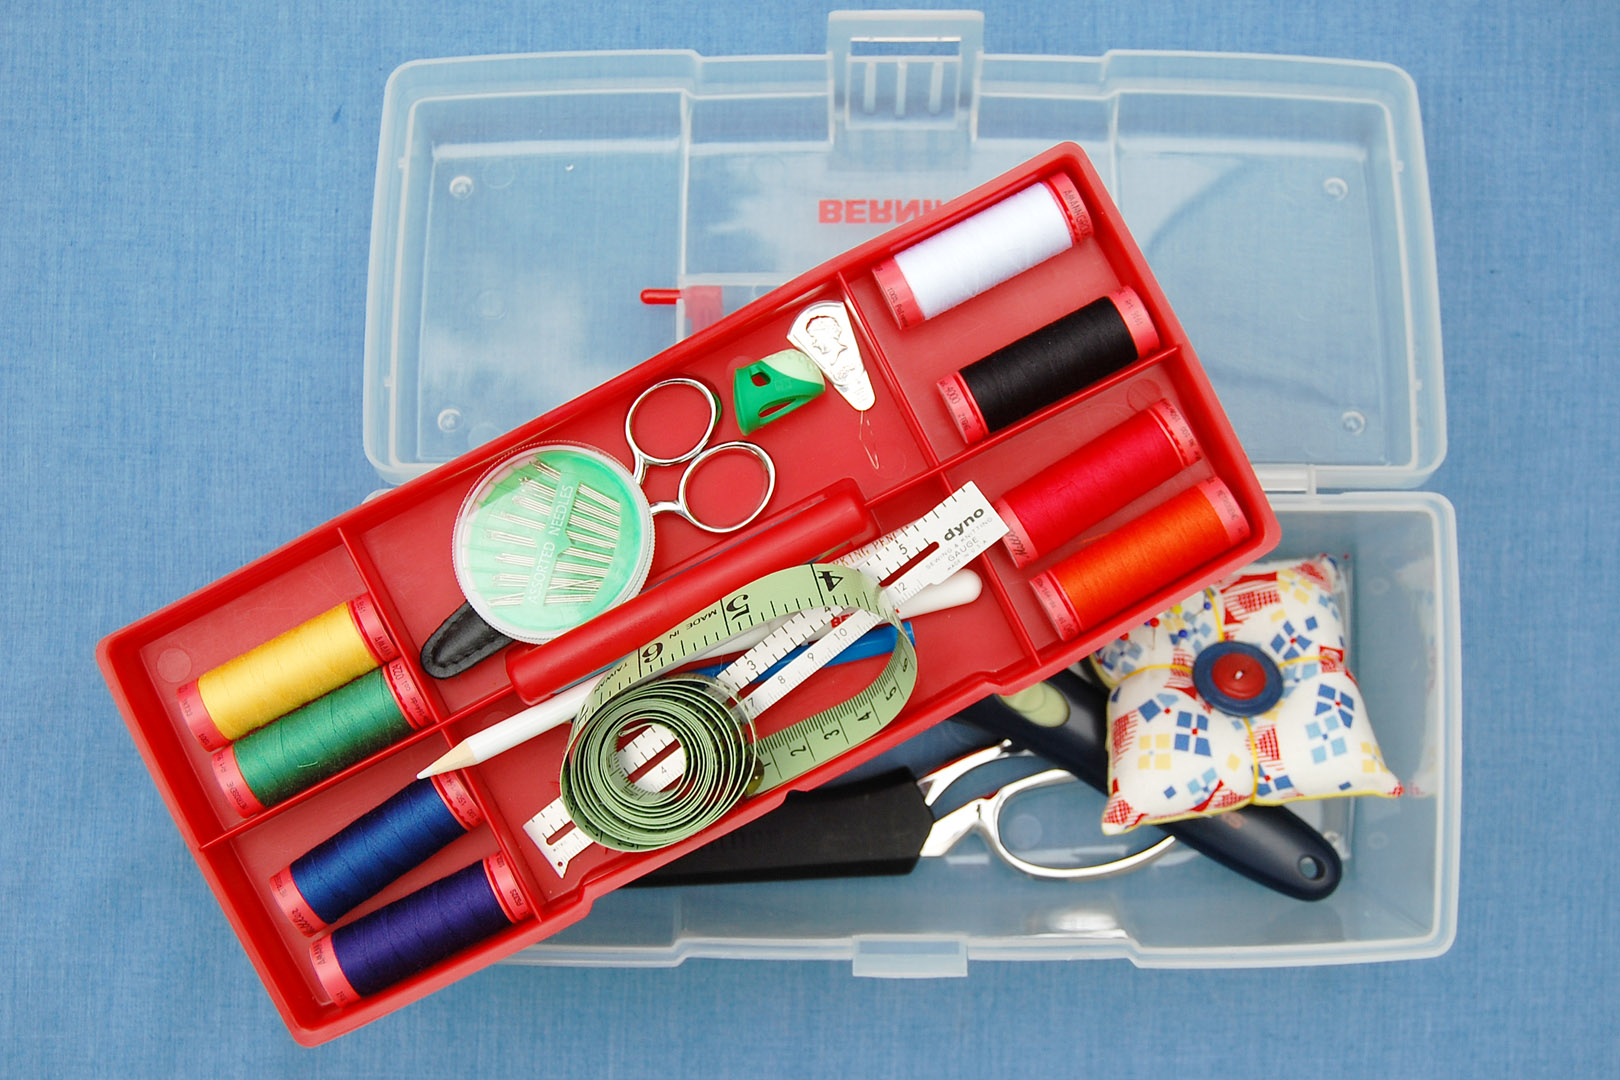 Beginner's Sewing Kit - Small Size